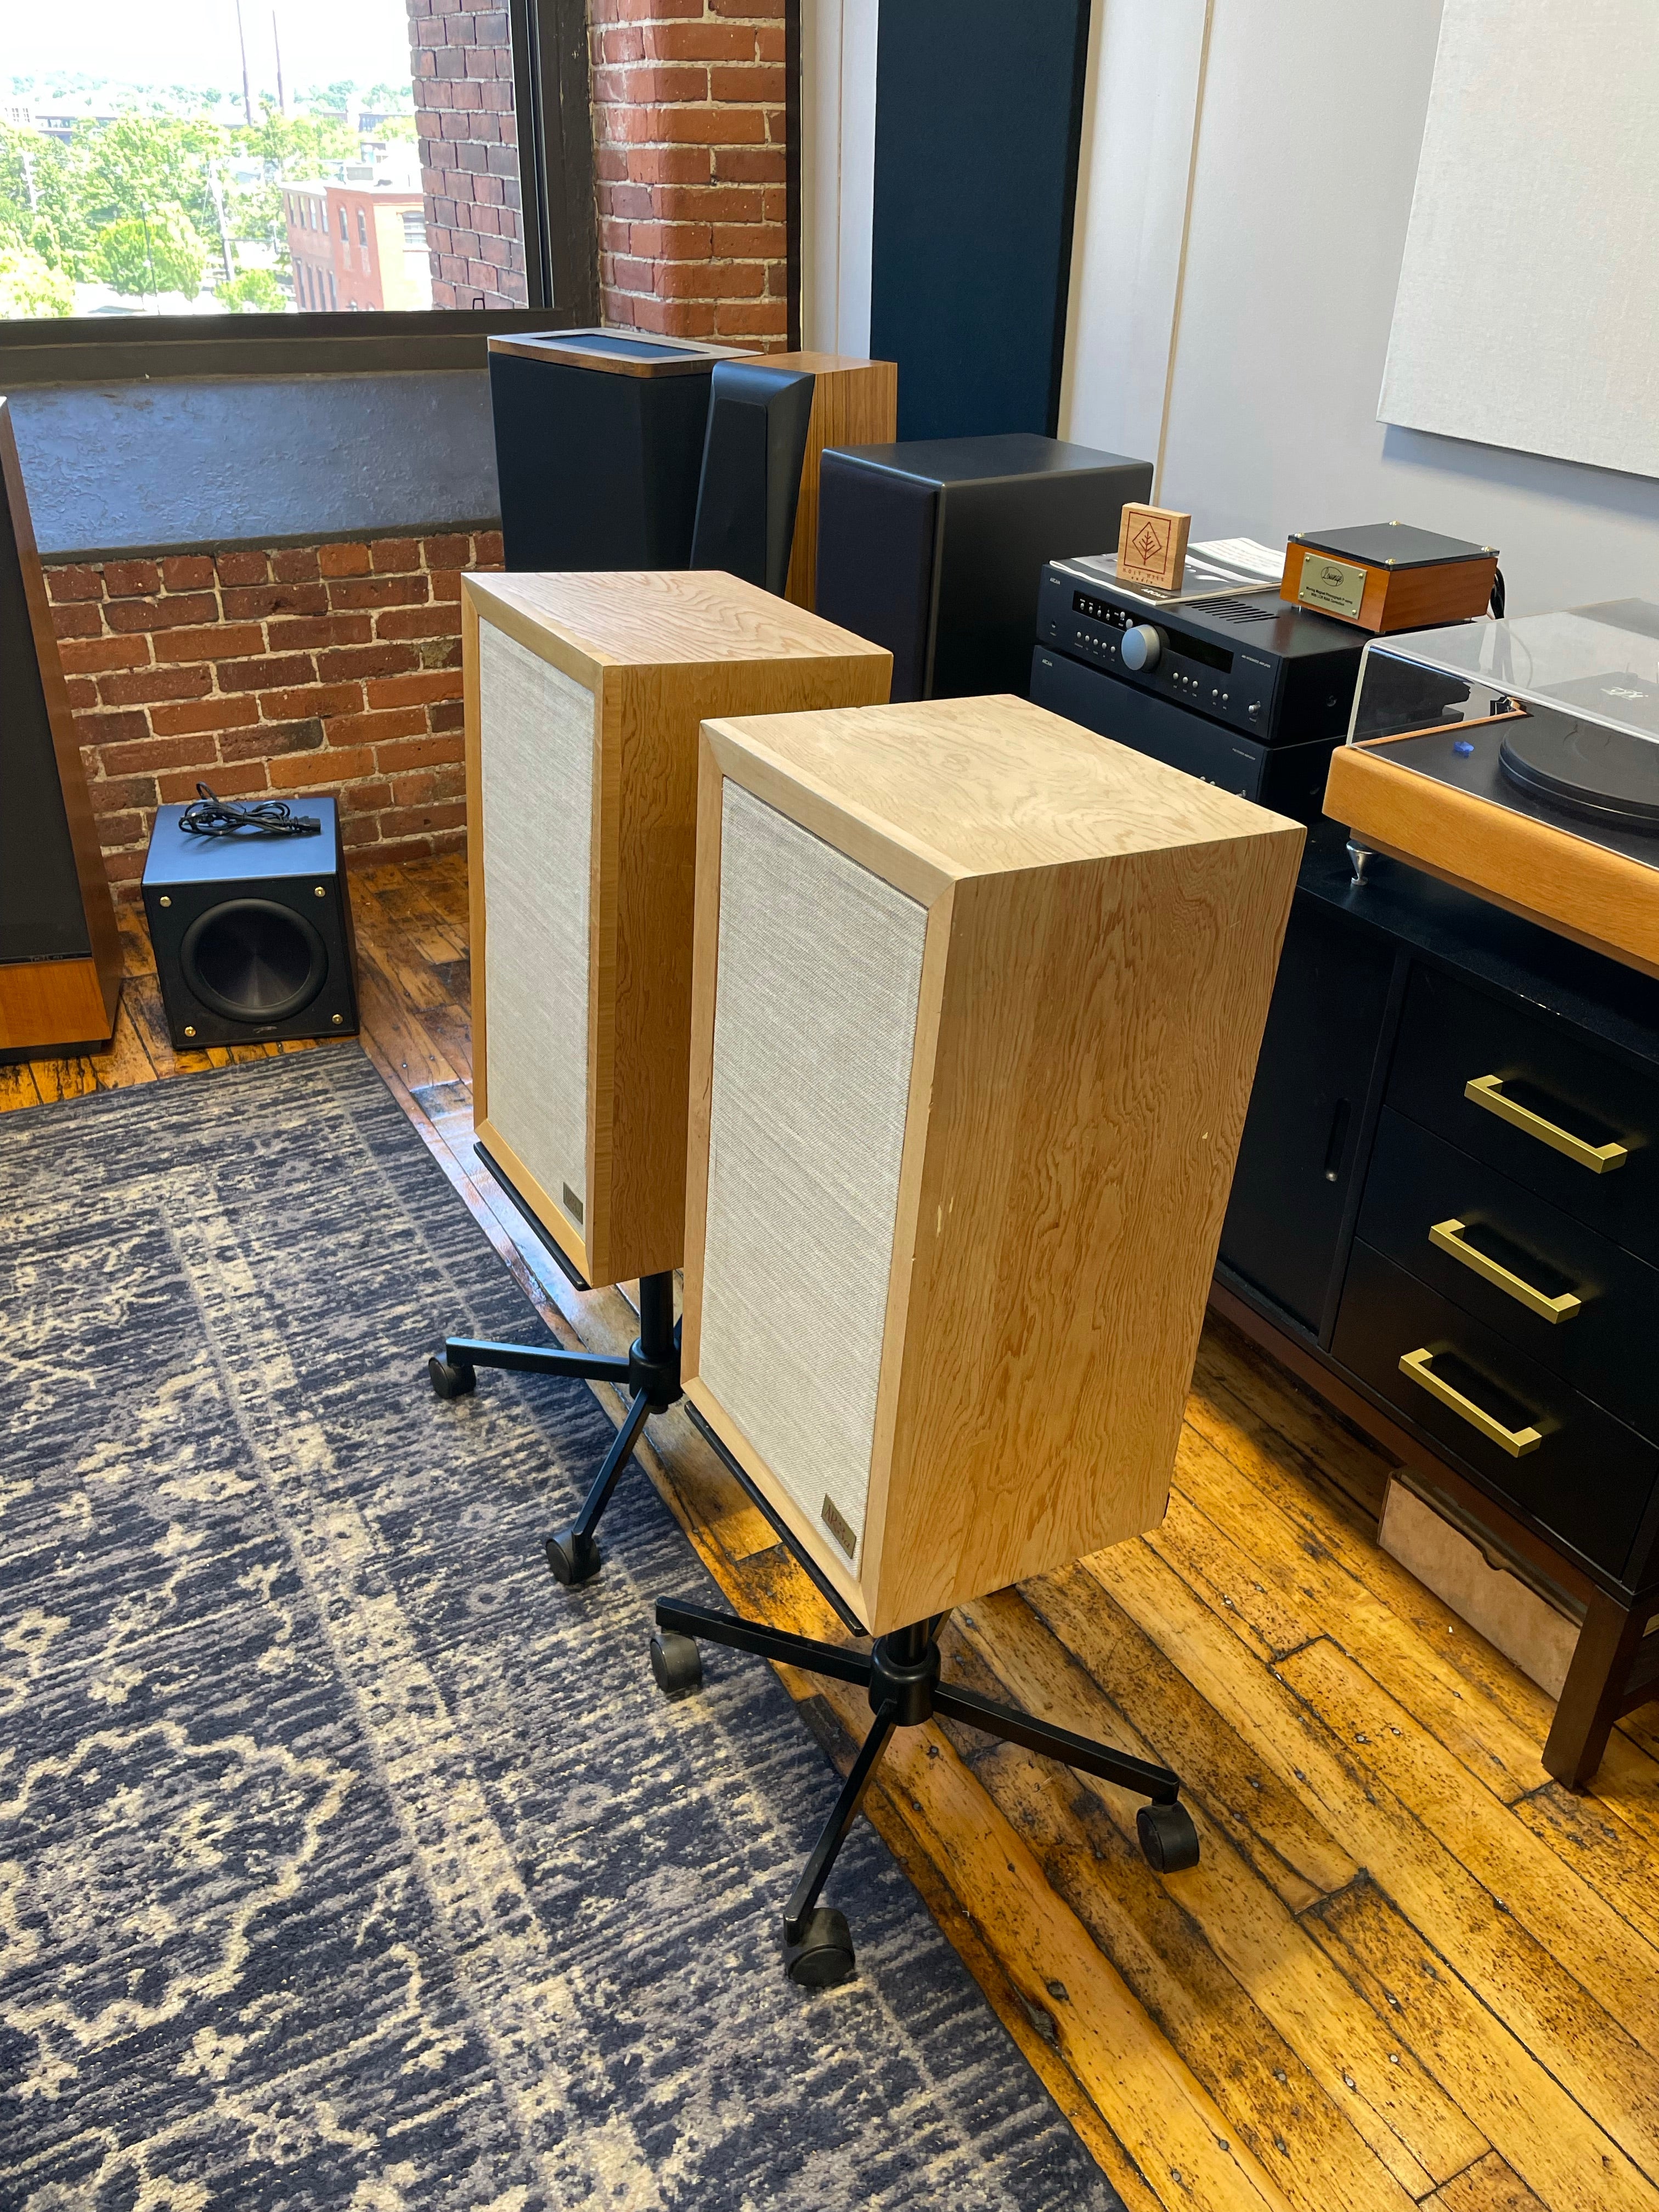 Acoustic Research AR3a Pine "Utility" Cabinets - SOLD